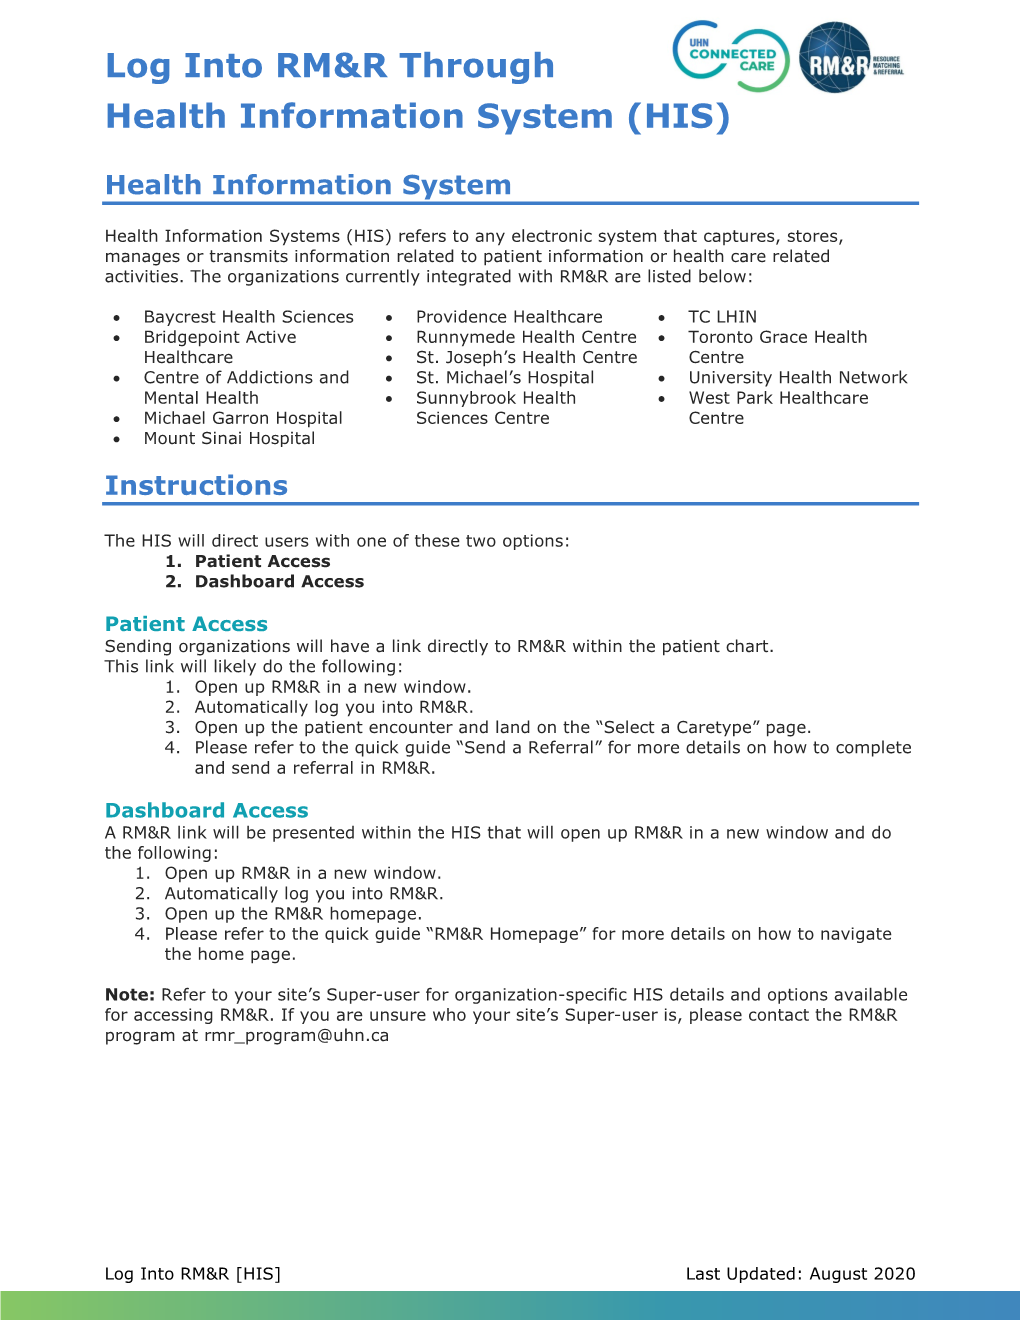 Log Into RM&R Through Health Information System (HIS)